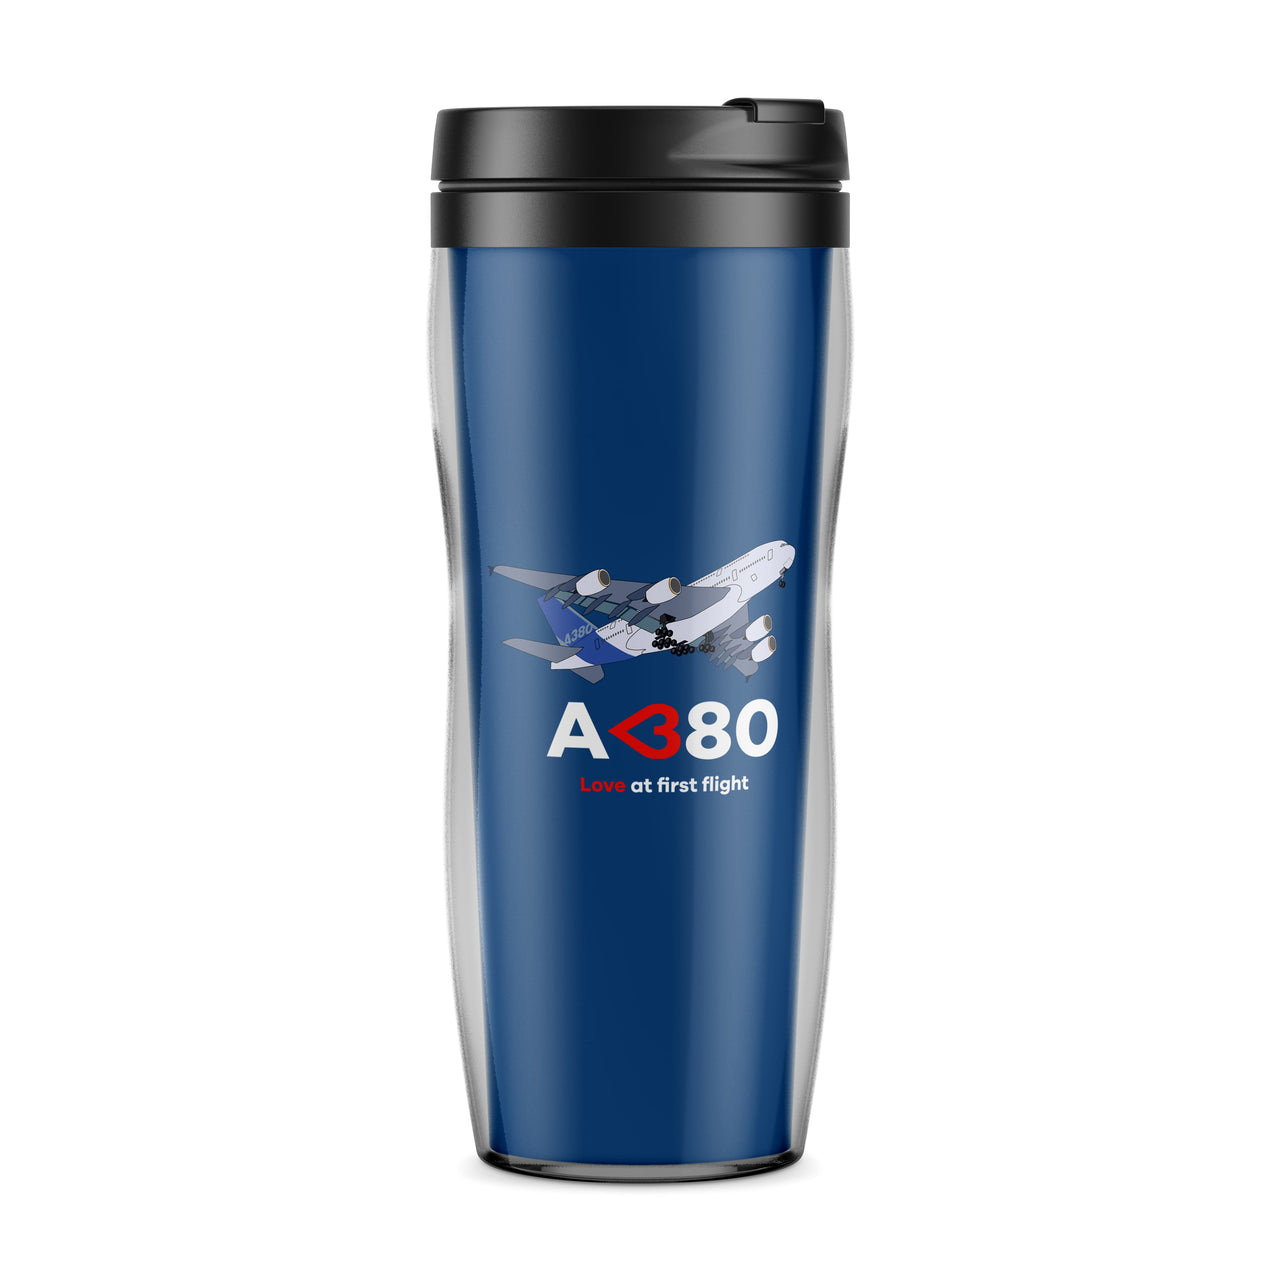 Airbus A380 Love at first flight Designed Plastic Travel Mugs